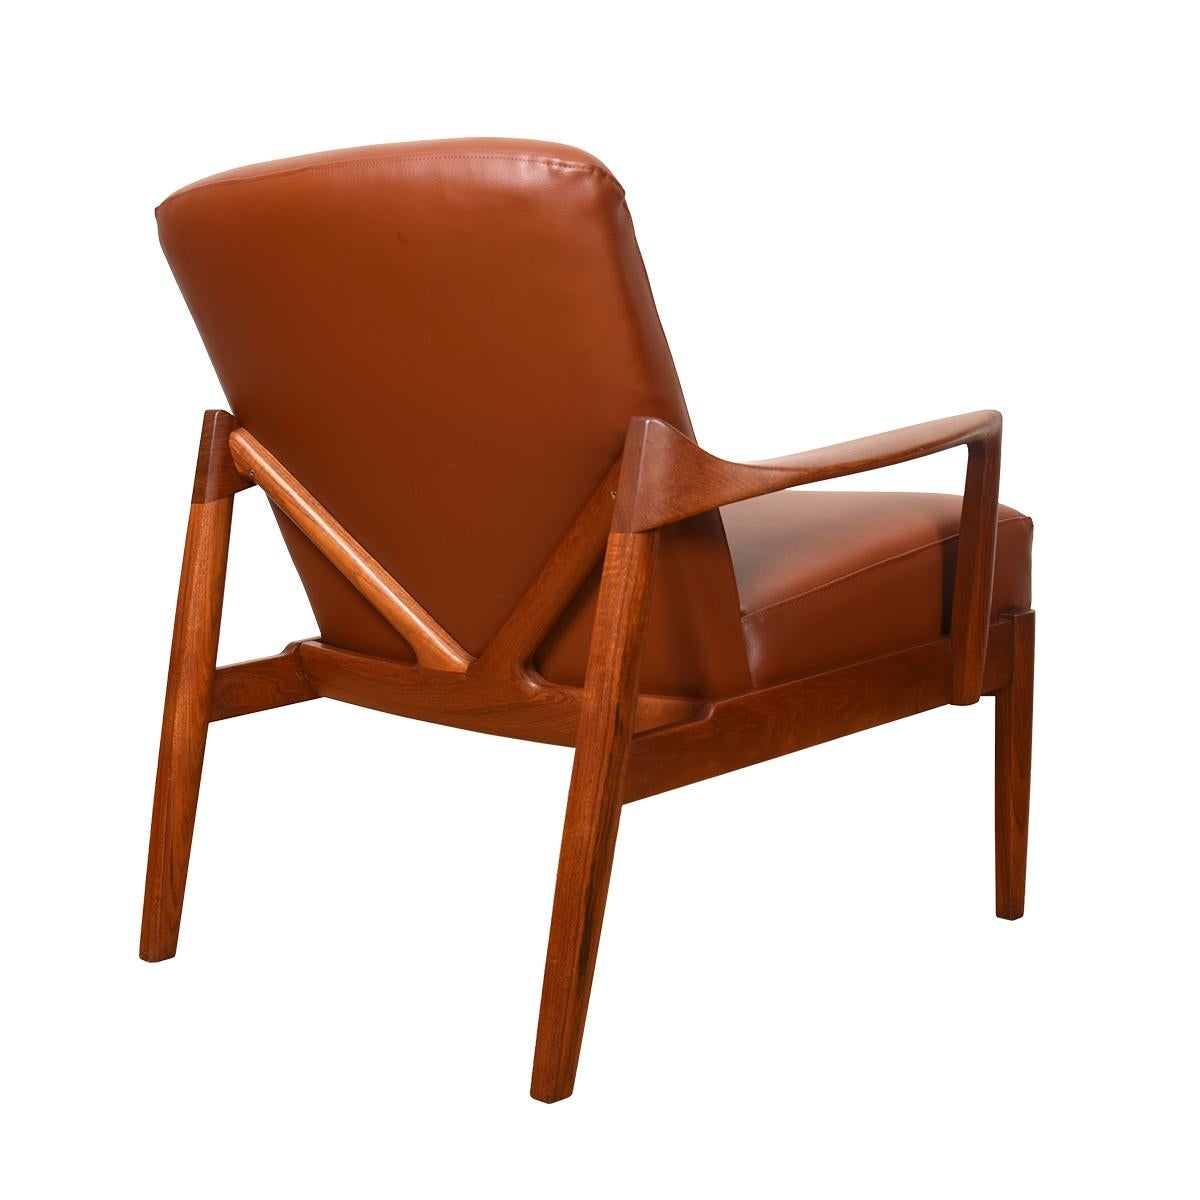  We are pleased to offer this special chair by Tove & Edvard Kindt-Larsen with a teak frame as beautiful from the back as it is from the front.
The arms clutch the back leg which helps nestle the back cushion into the teak V of the back. Large